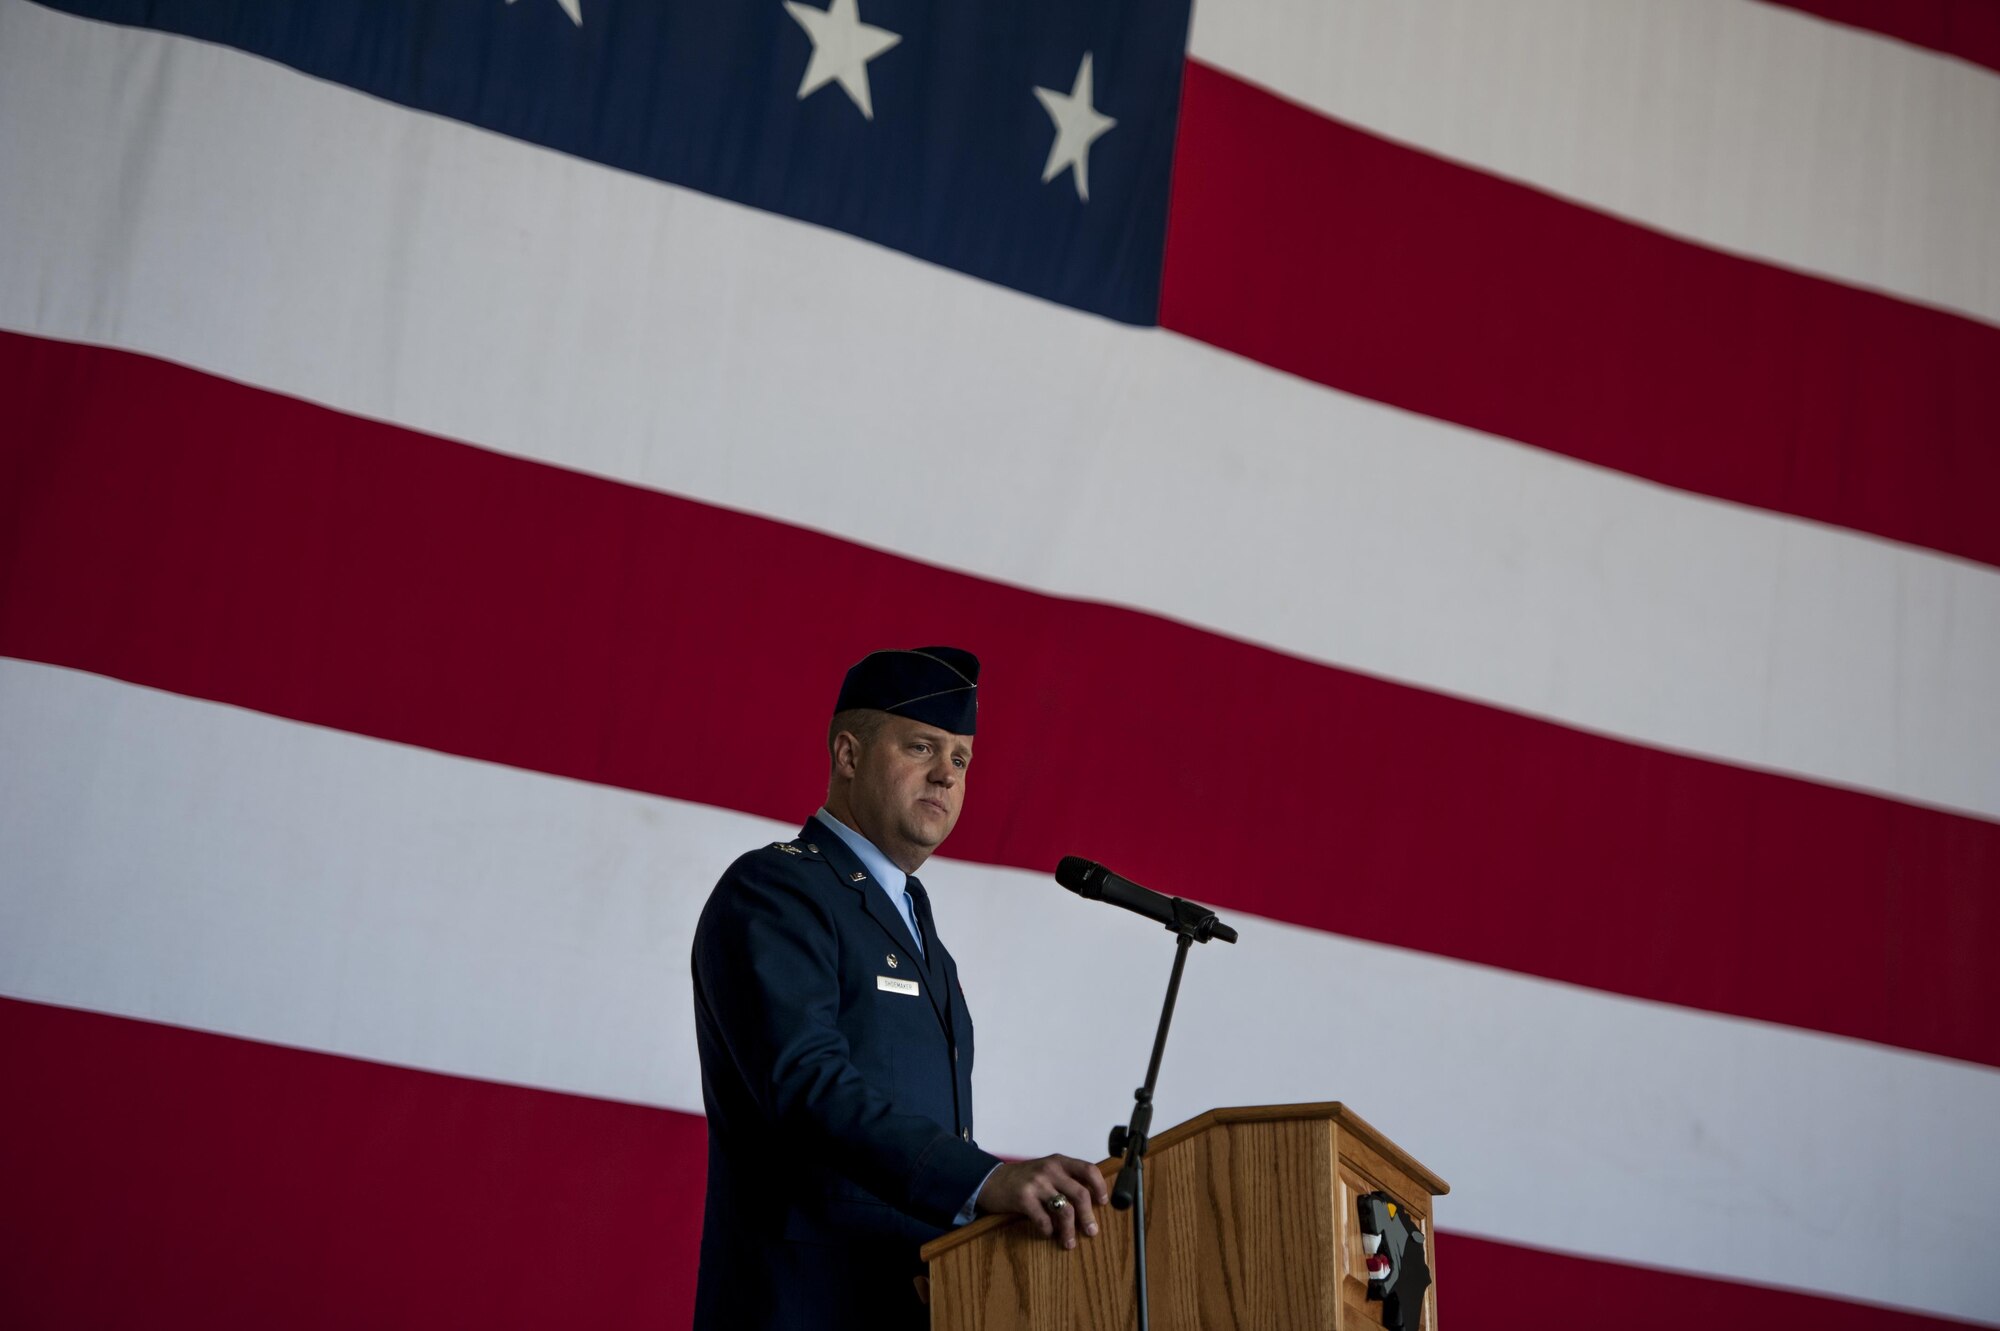 U.S. Air Force Col. David G. Shoemaker, 8th Fighter Wing commander, speaks during the change of command ceremony at Kunsan Air Base, Republic of Korea, May 25, 2017. The ceremony highlights the relinquishment of command from one commander to the next. (U.S. Air Force photo by Senior Airman Colville McFee/Released)